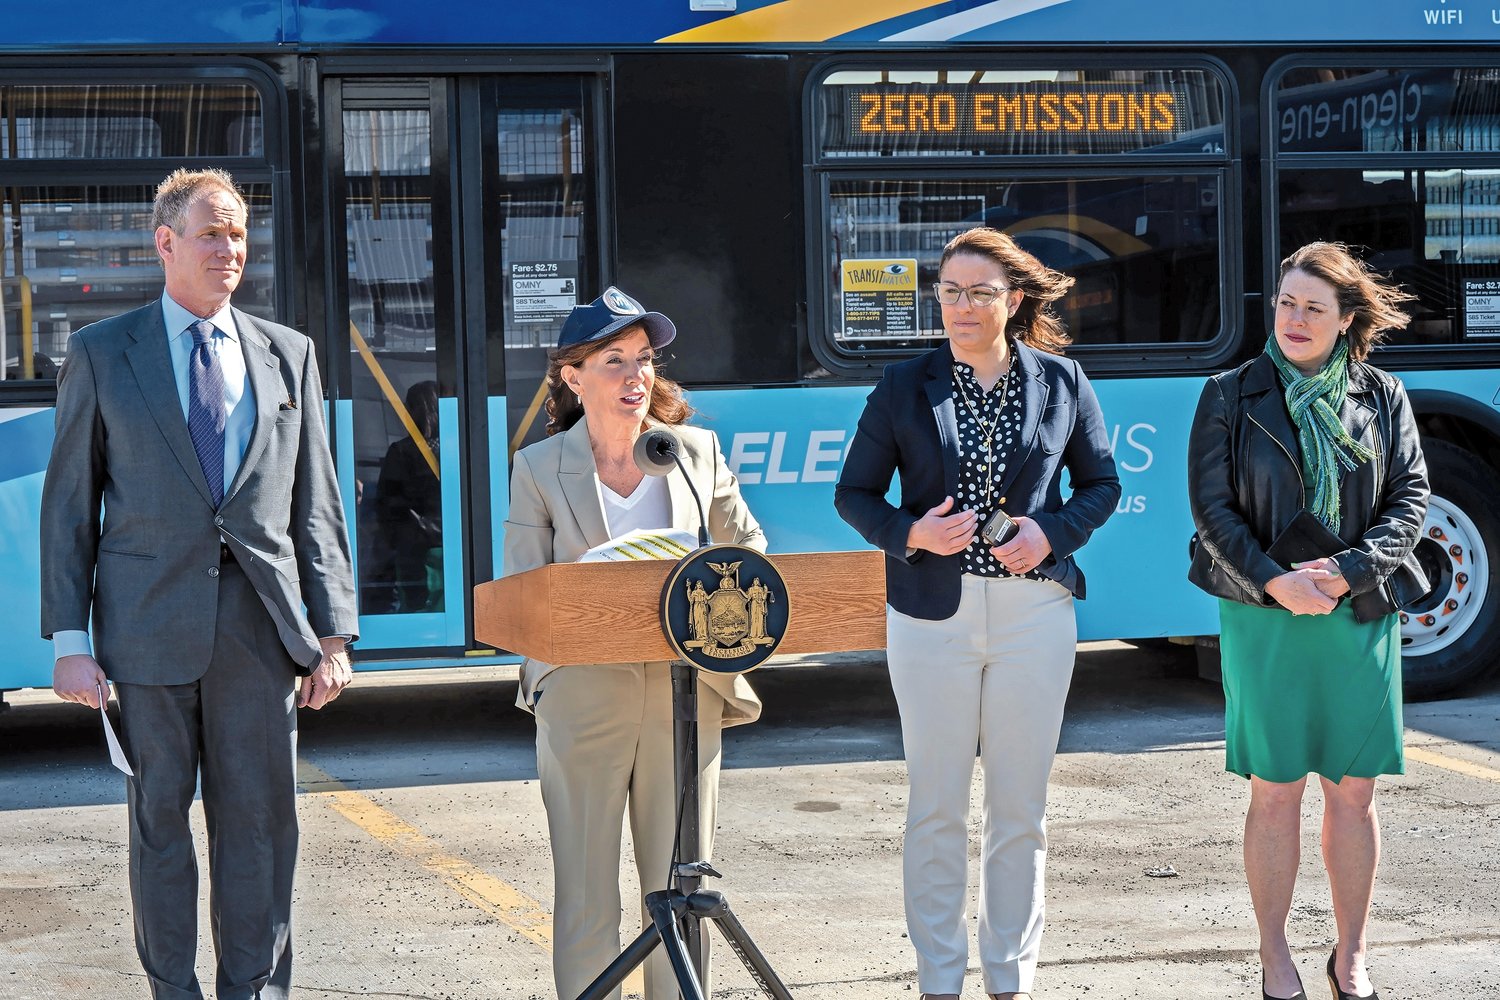 On Earth Day, Gov. Kathy Hochul announces a new fleet of all-electric MTA buses, some of which will launch from the Kingsbridge bus depot.